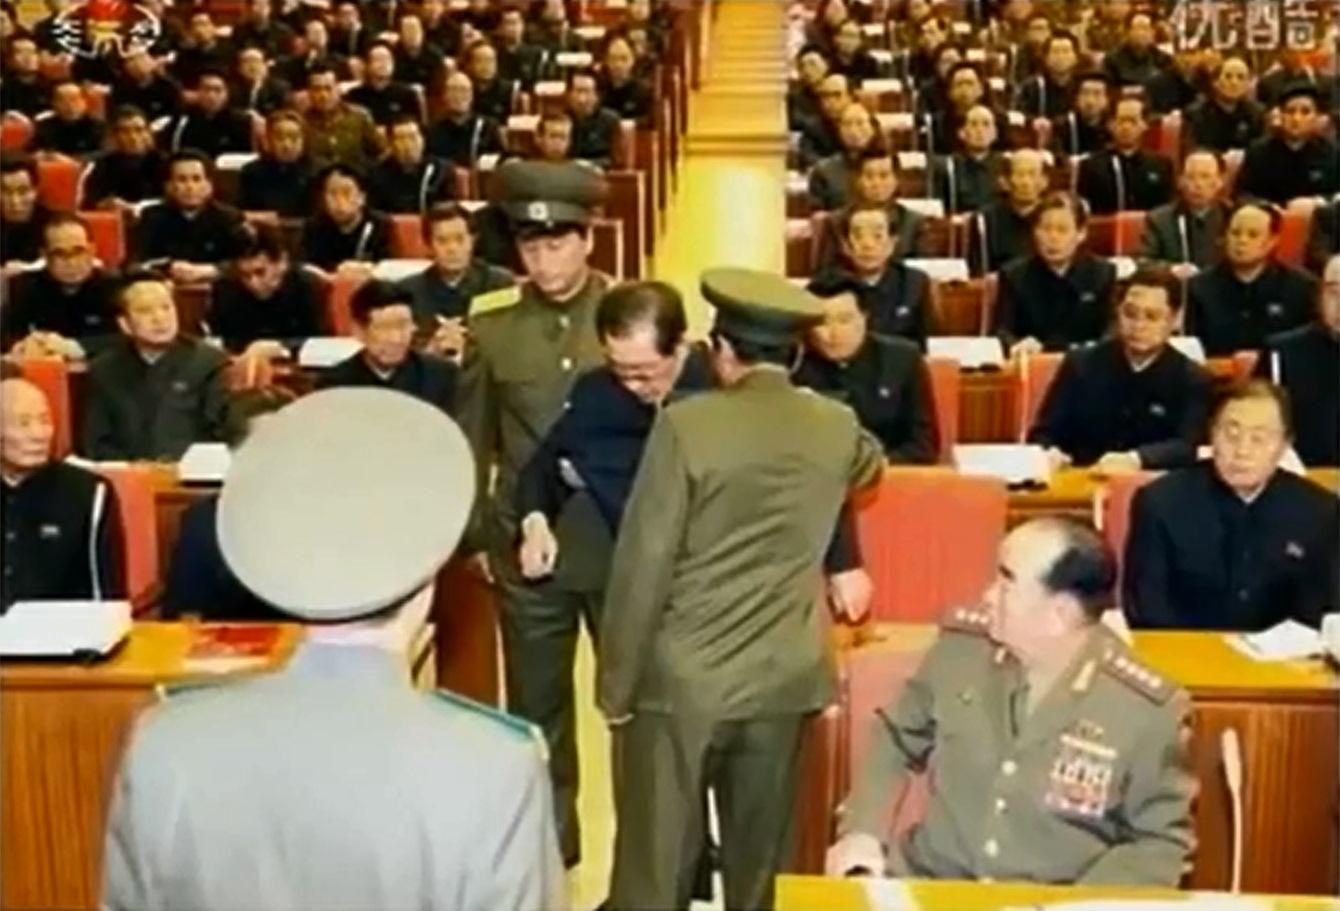 The moment of Jang Song Thaek's arrest, after he was denounced in the middle of a party meeting.